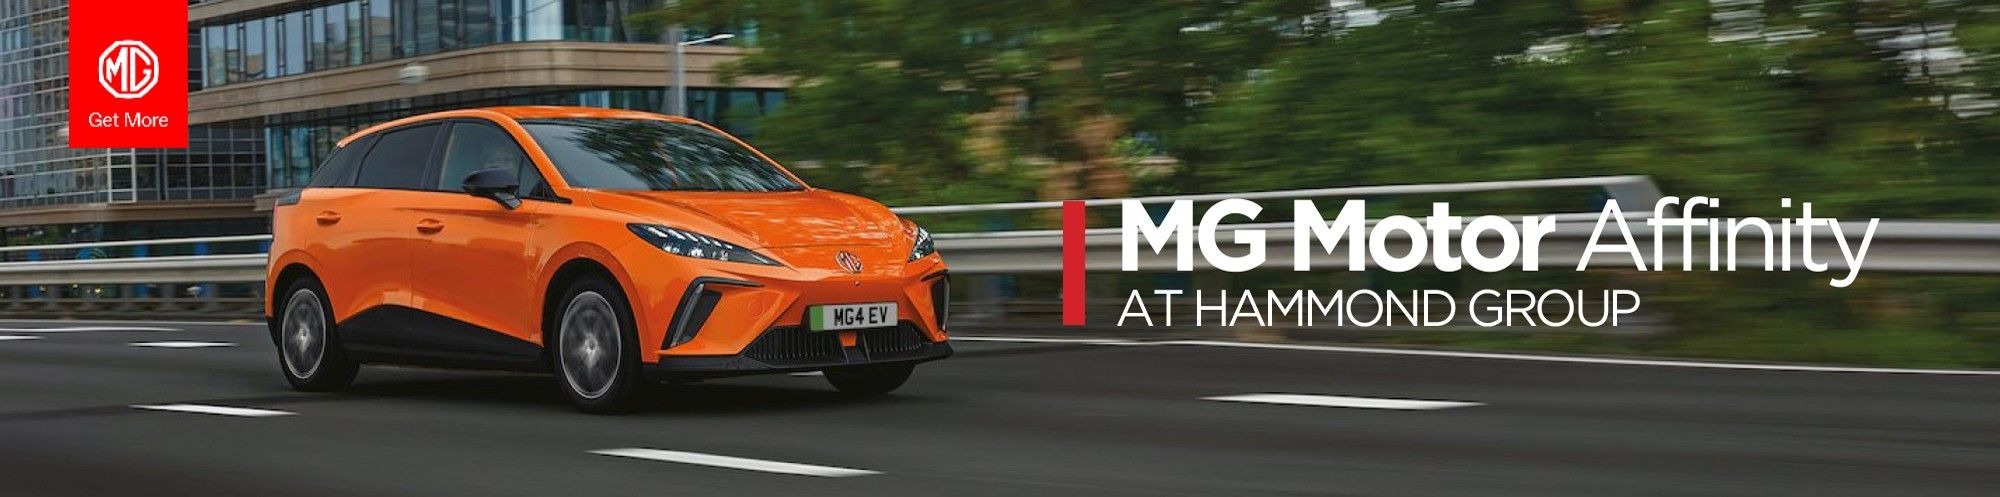 Latest MG Affinity Offers at Hammonds